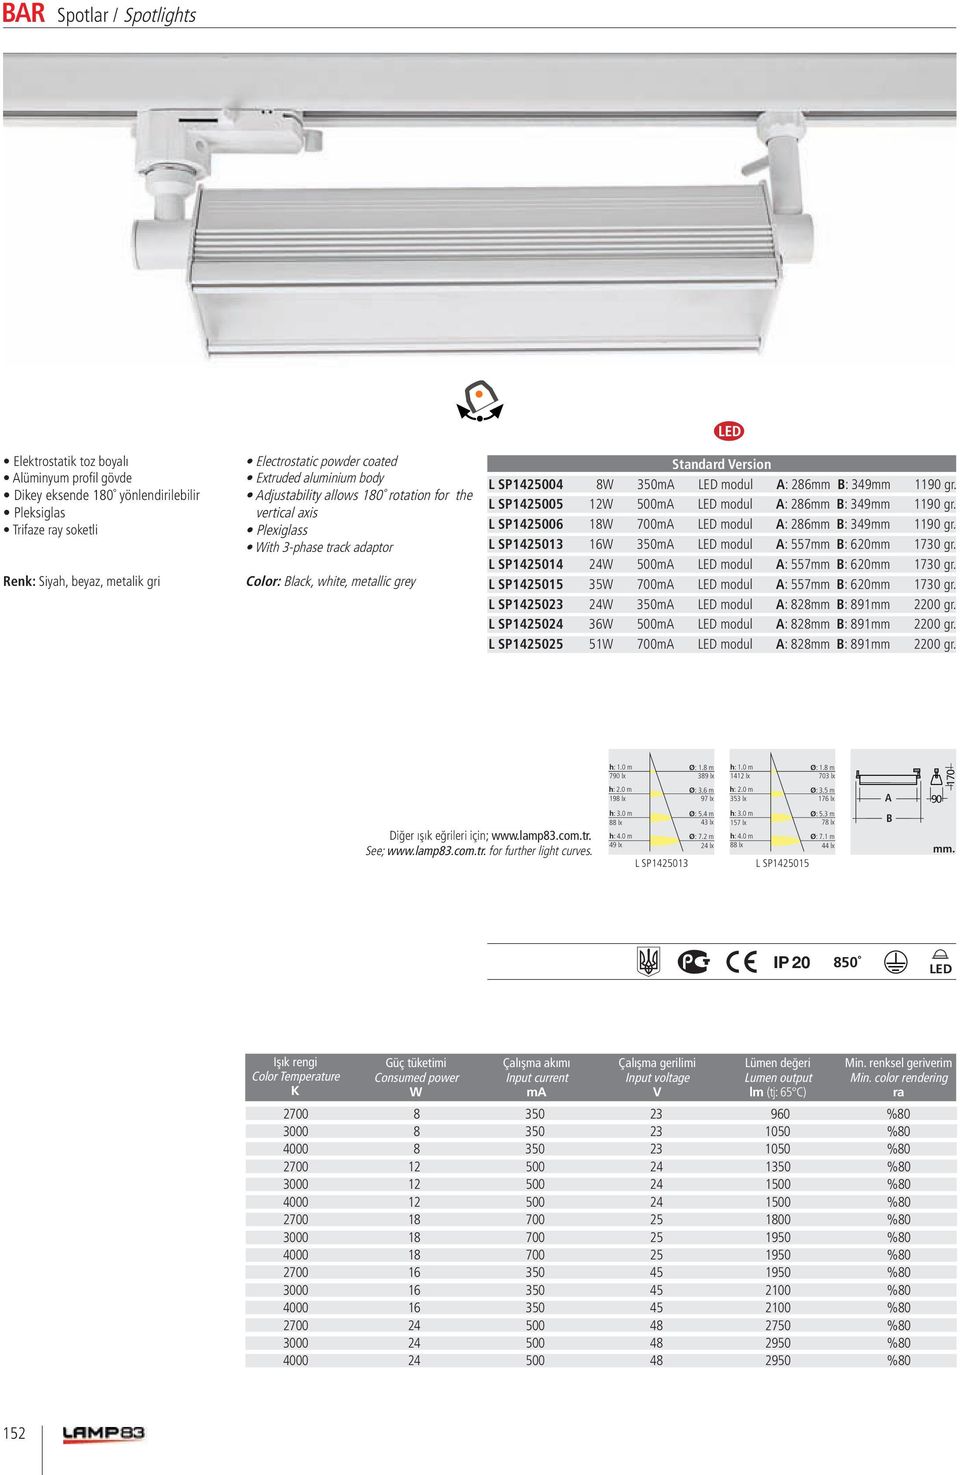 With 3-phase track adaptor L SP1425013 16W 350mA LED modul A: 557mm B: 620mm 1730 gr. L SP1425014 24W 500mA LED modul A: 557mm B: 620mm 1730 gr.